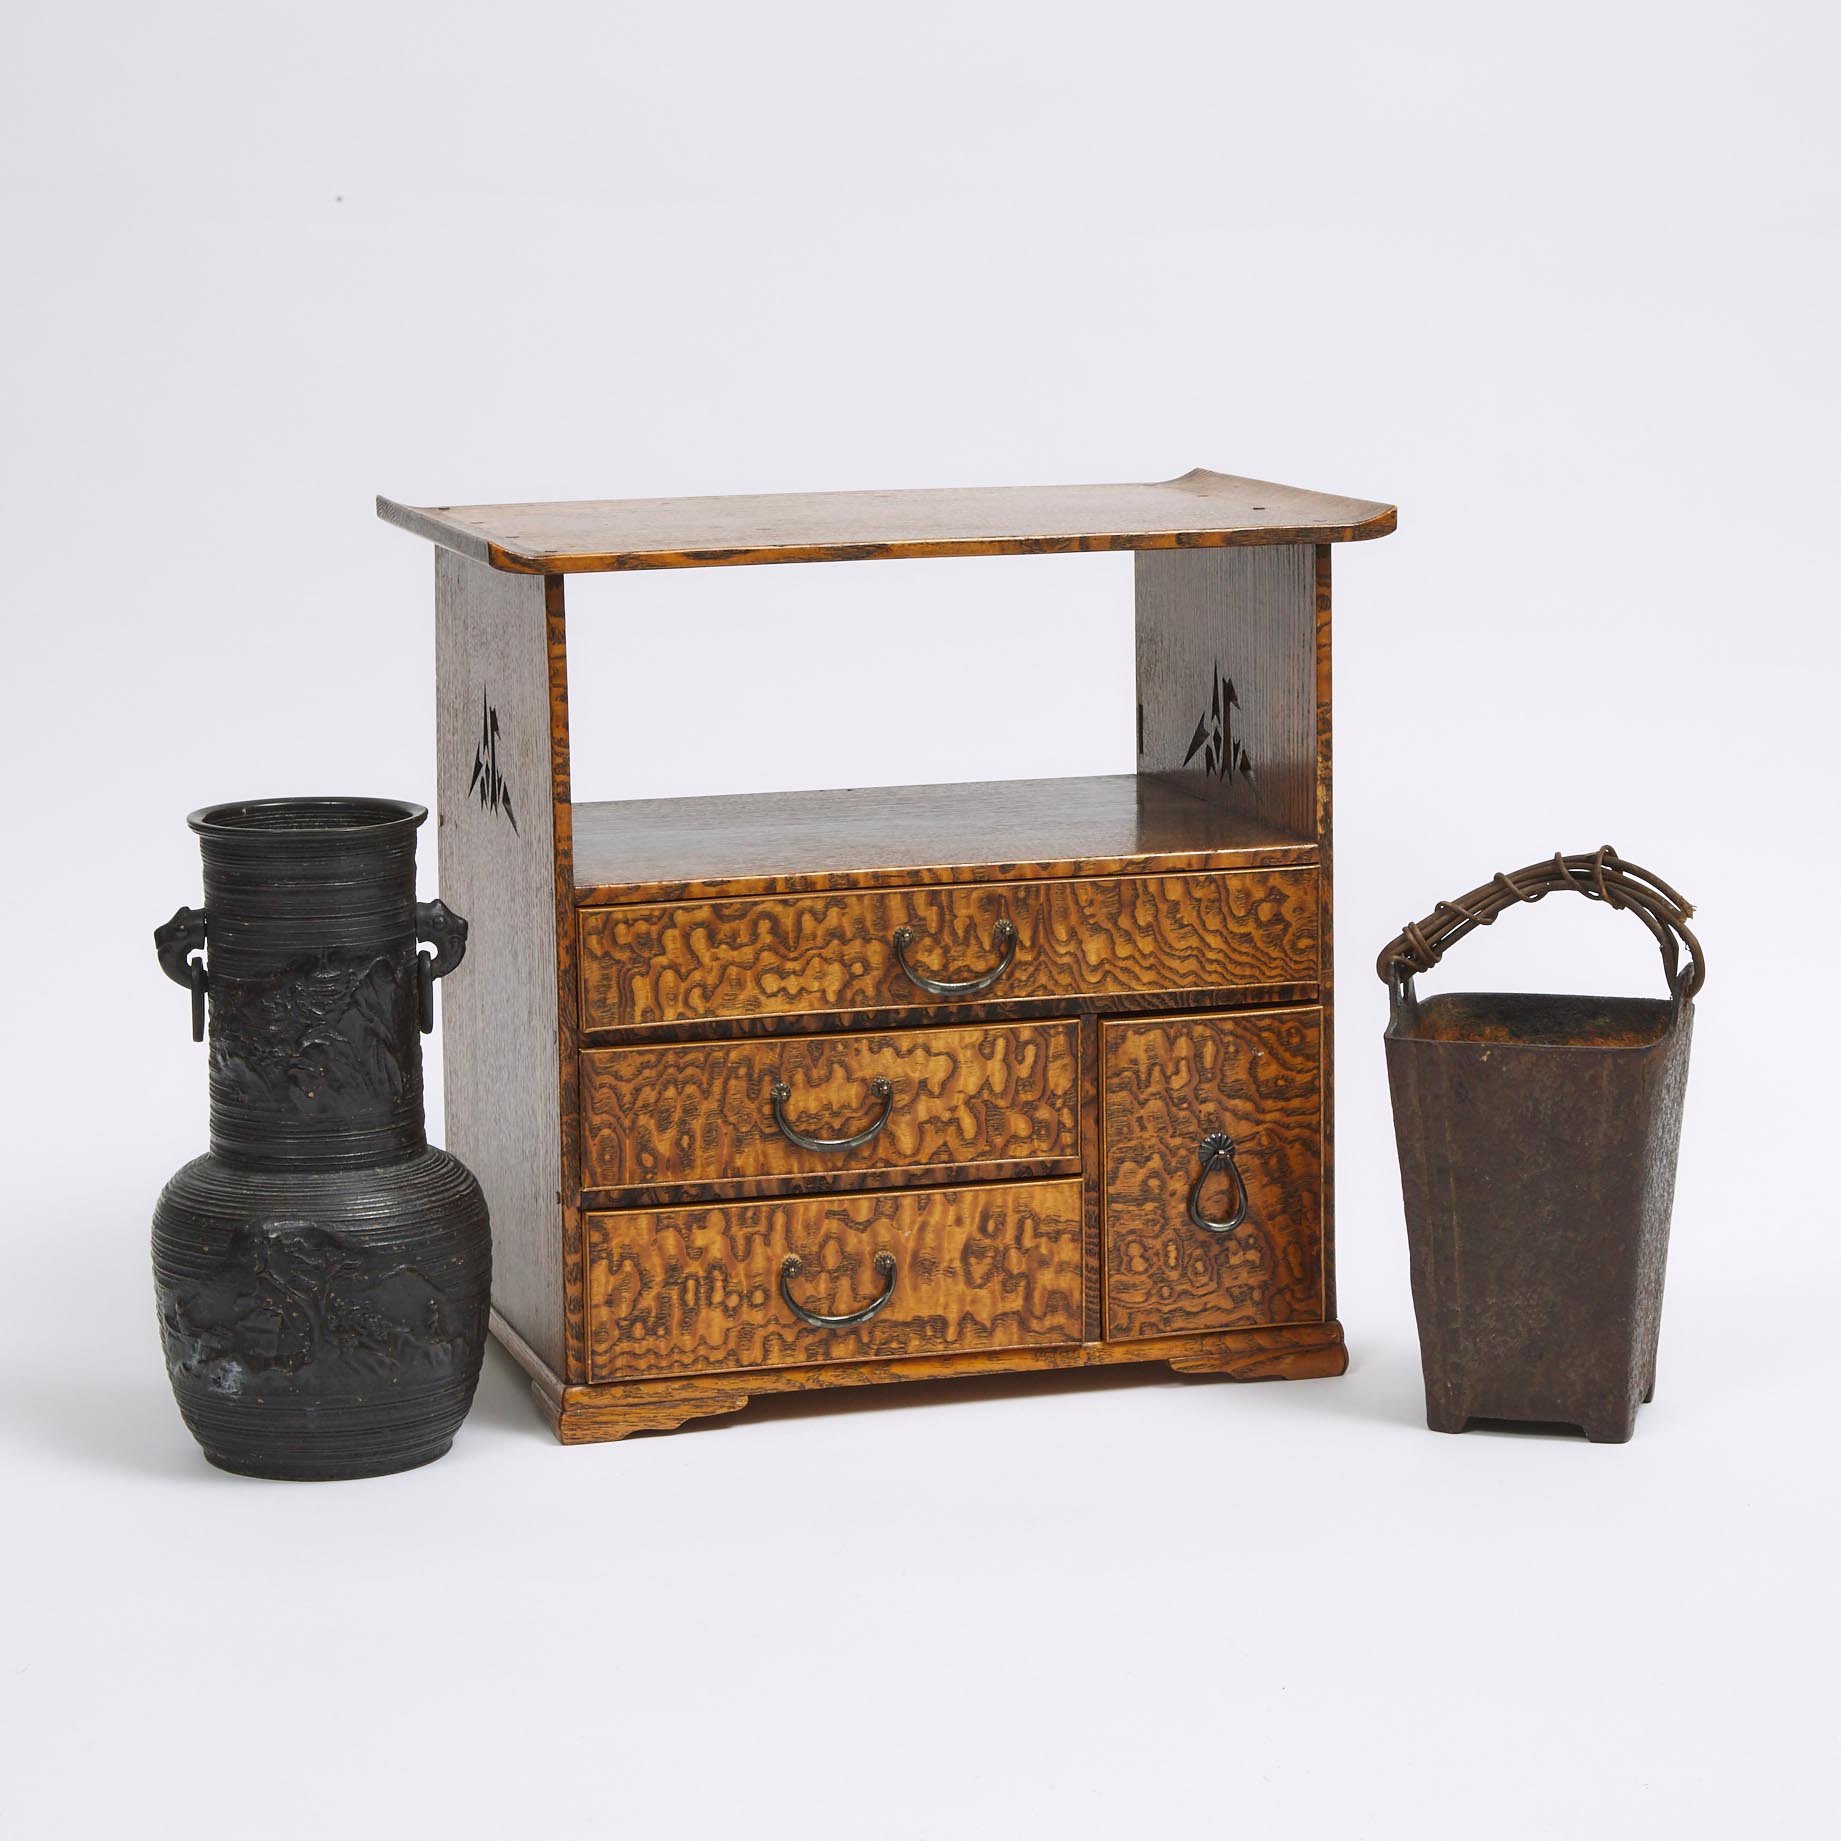 A Japanese Small Tea Tansu, together with Two Bronze Vessels, Early to Mid 20th Century